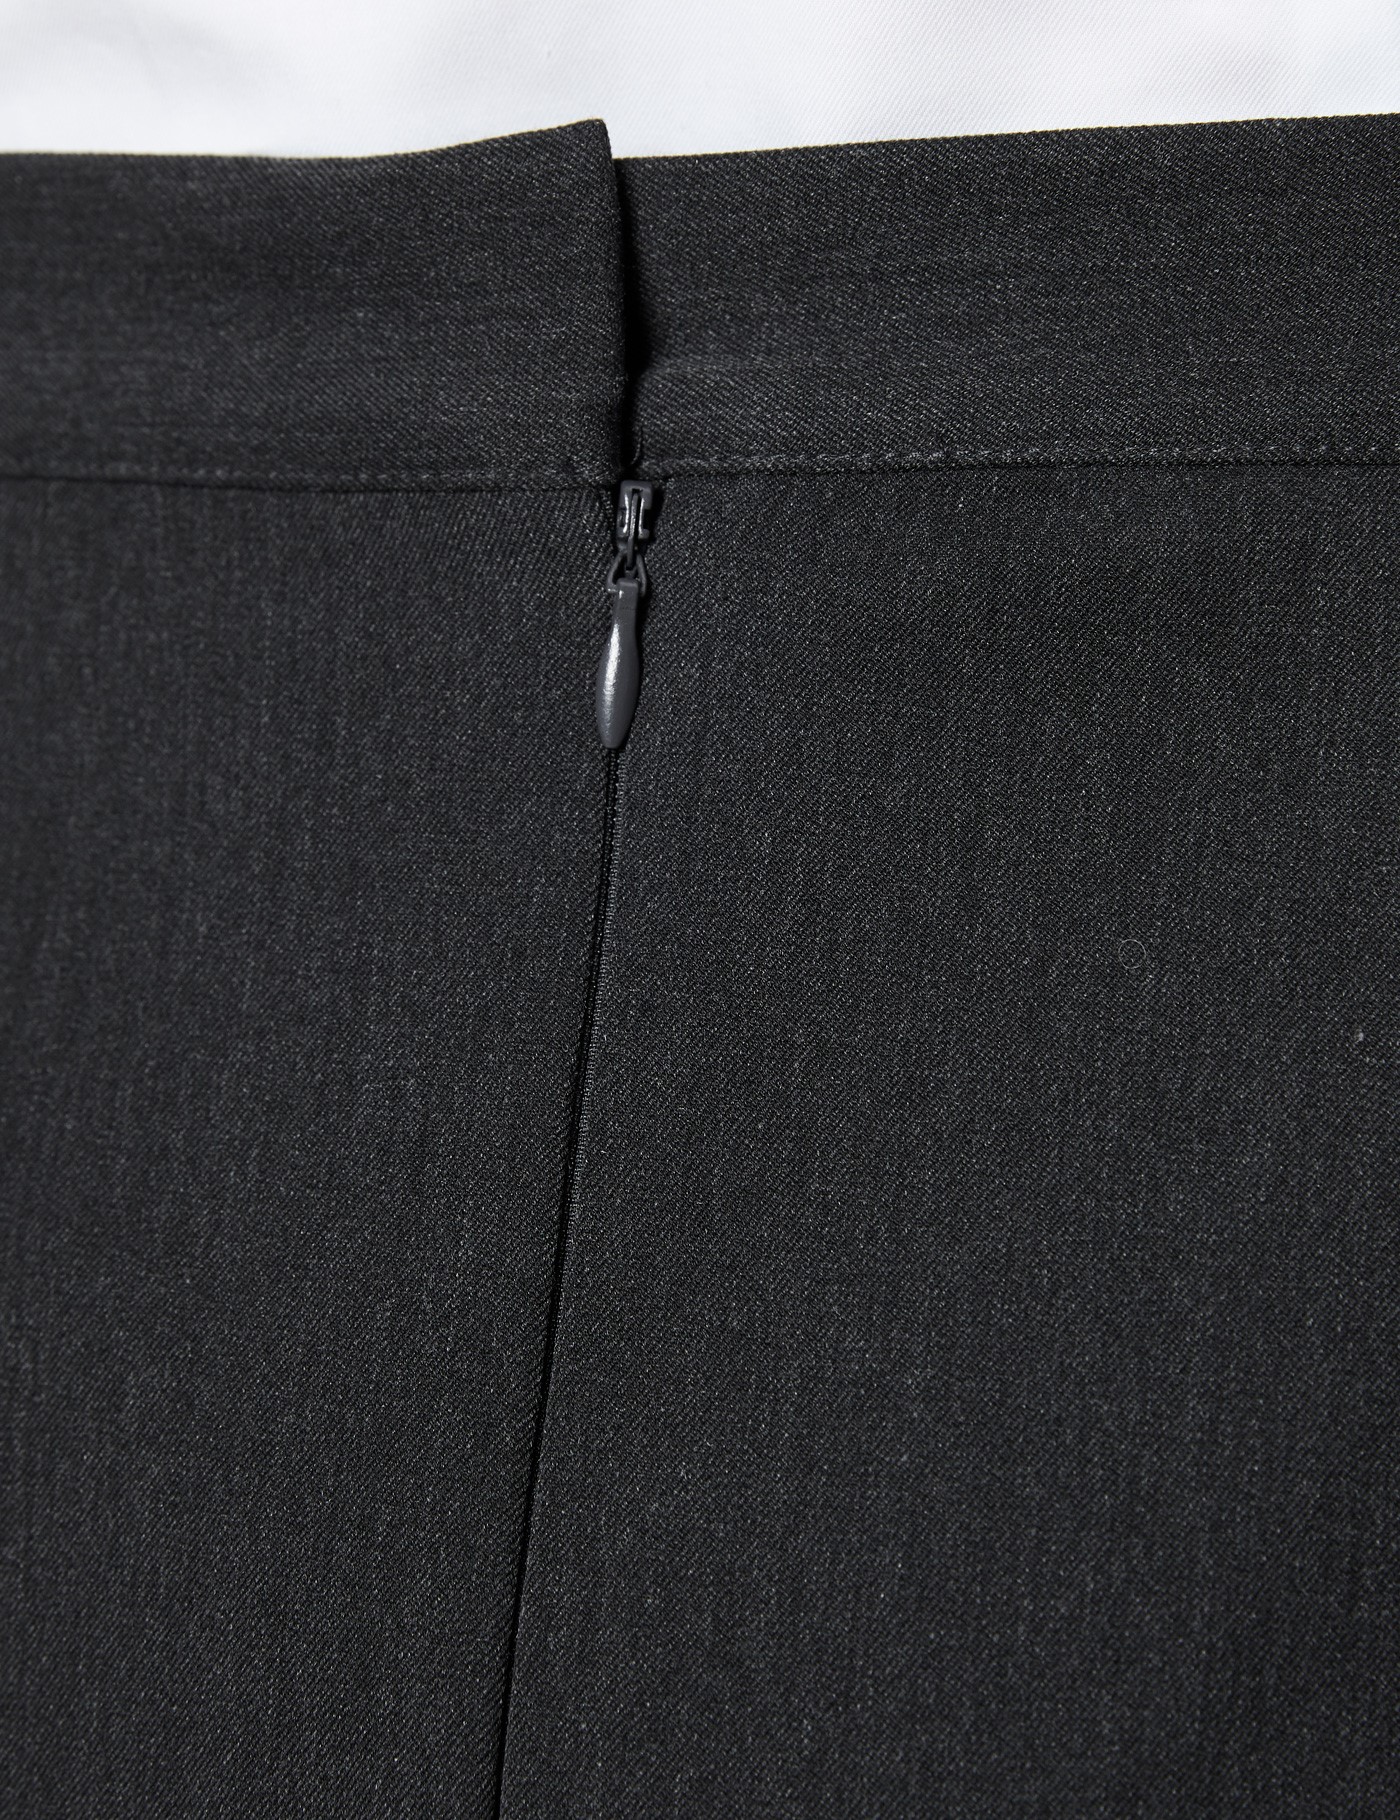 Charcoal Stretch Twill Pencil Skirt | Hawes & Curtis